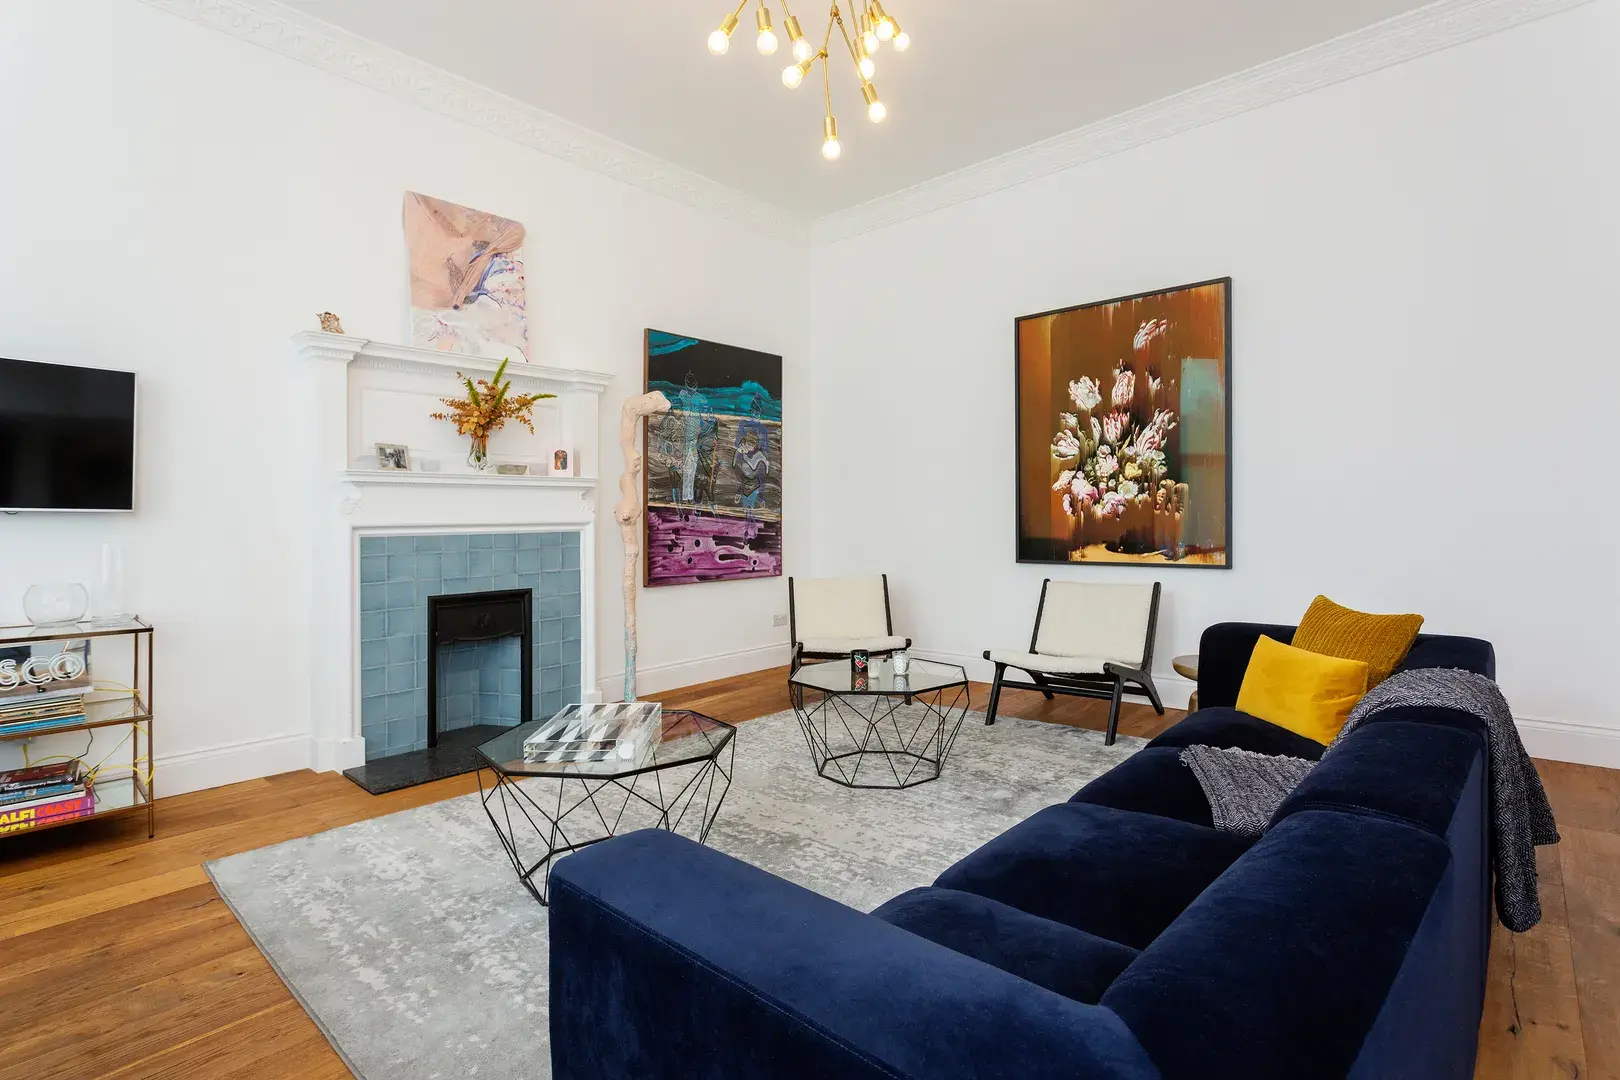 Fellows Road, holiday home in Primrose Hill, London